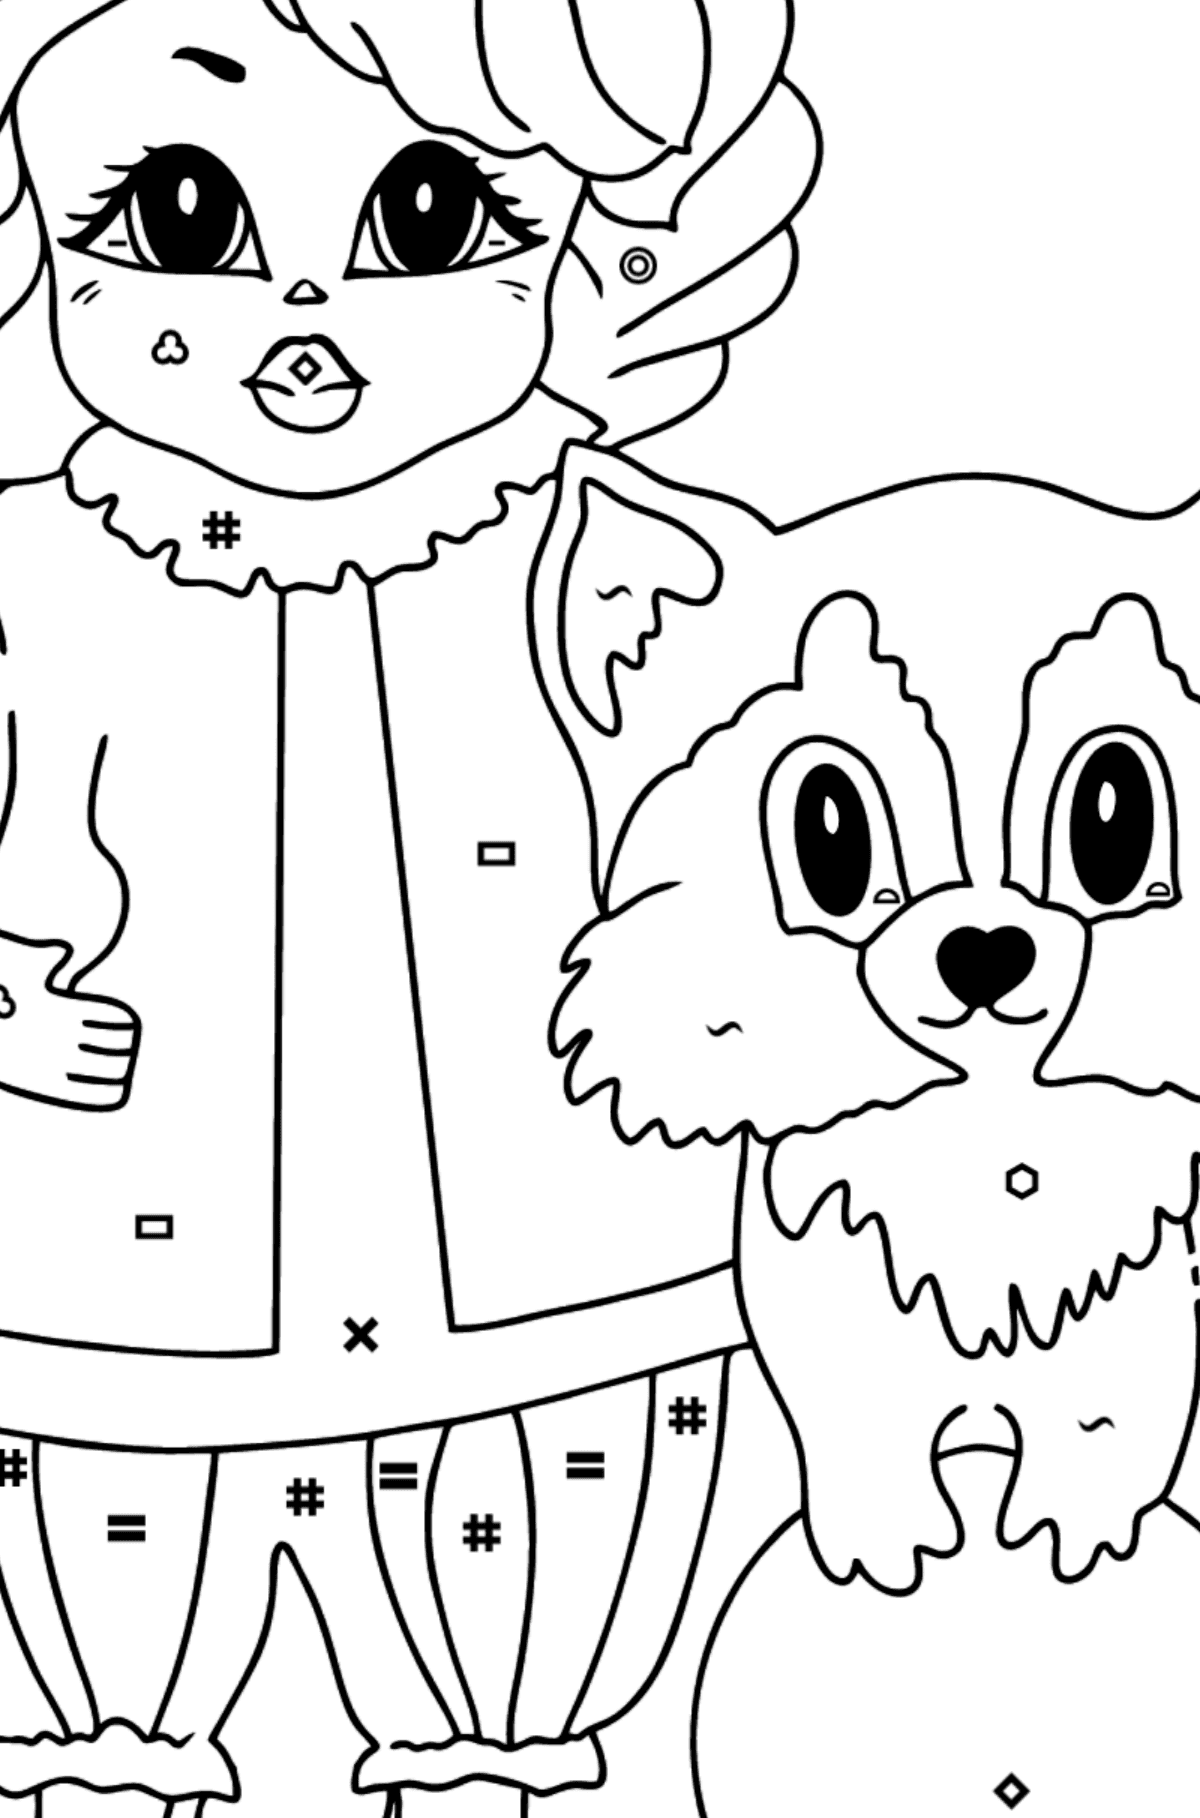 Coloring Page - A Princess with a Cat and a Racoon - Coloring by Symbols and Geometric Shapes for Kids